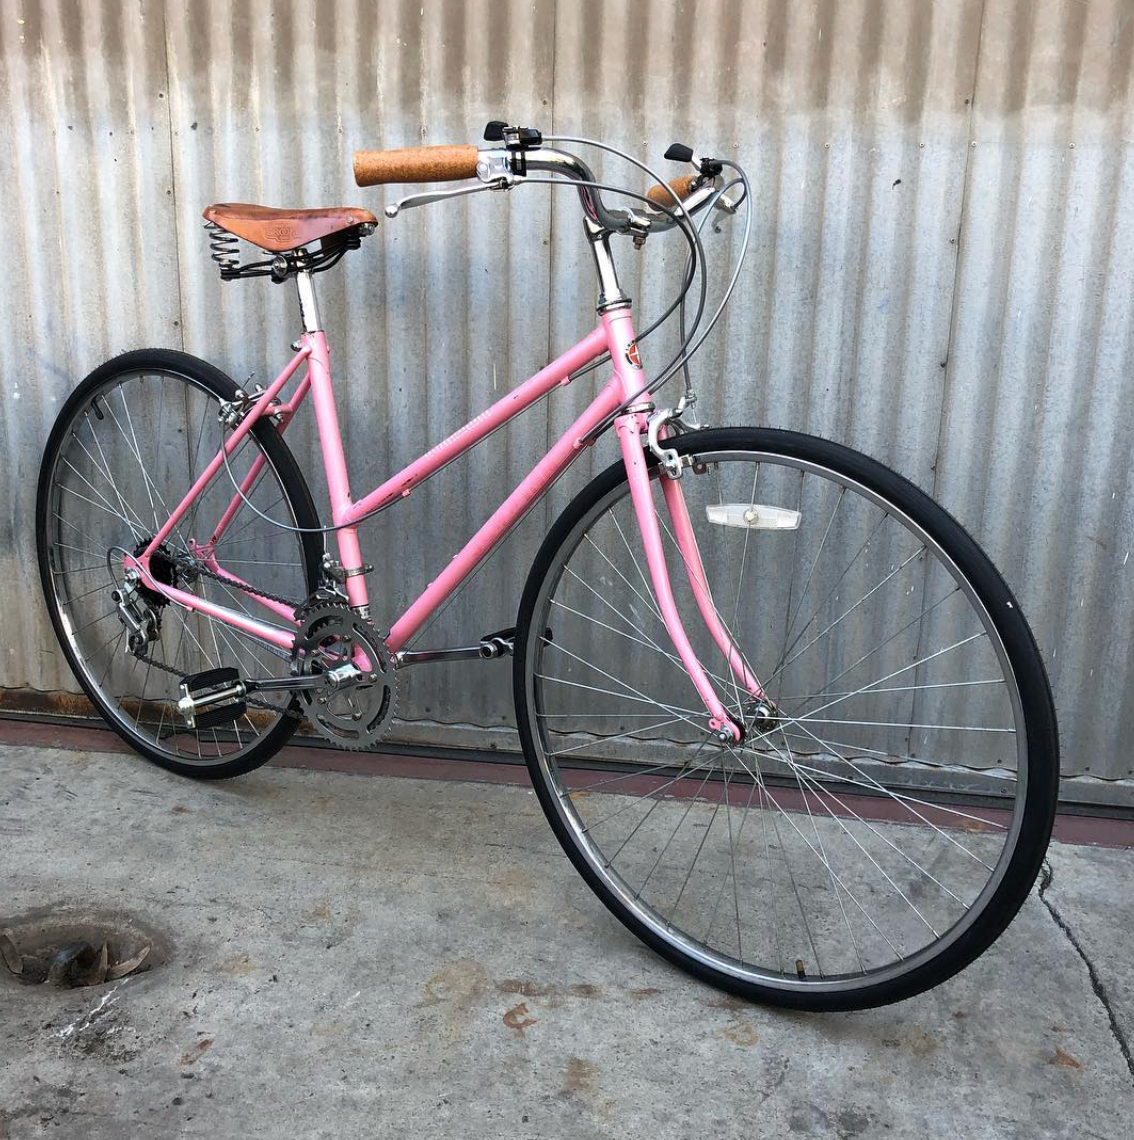 Pink Pearl Schwinn Caliente City Bike for Procuring Baguettes and Stinky Cheese